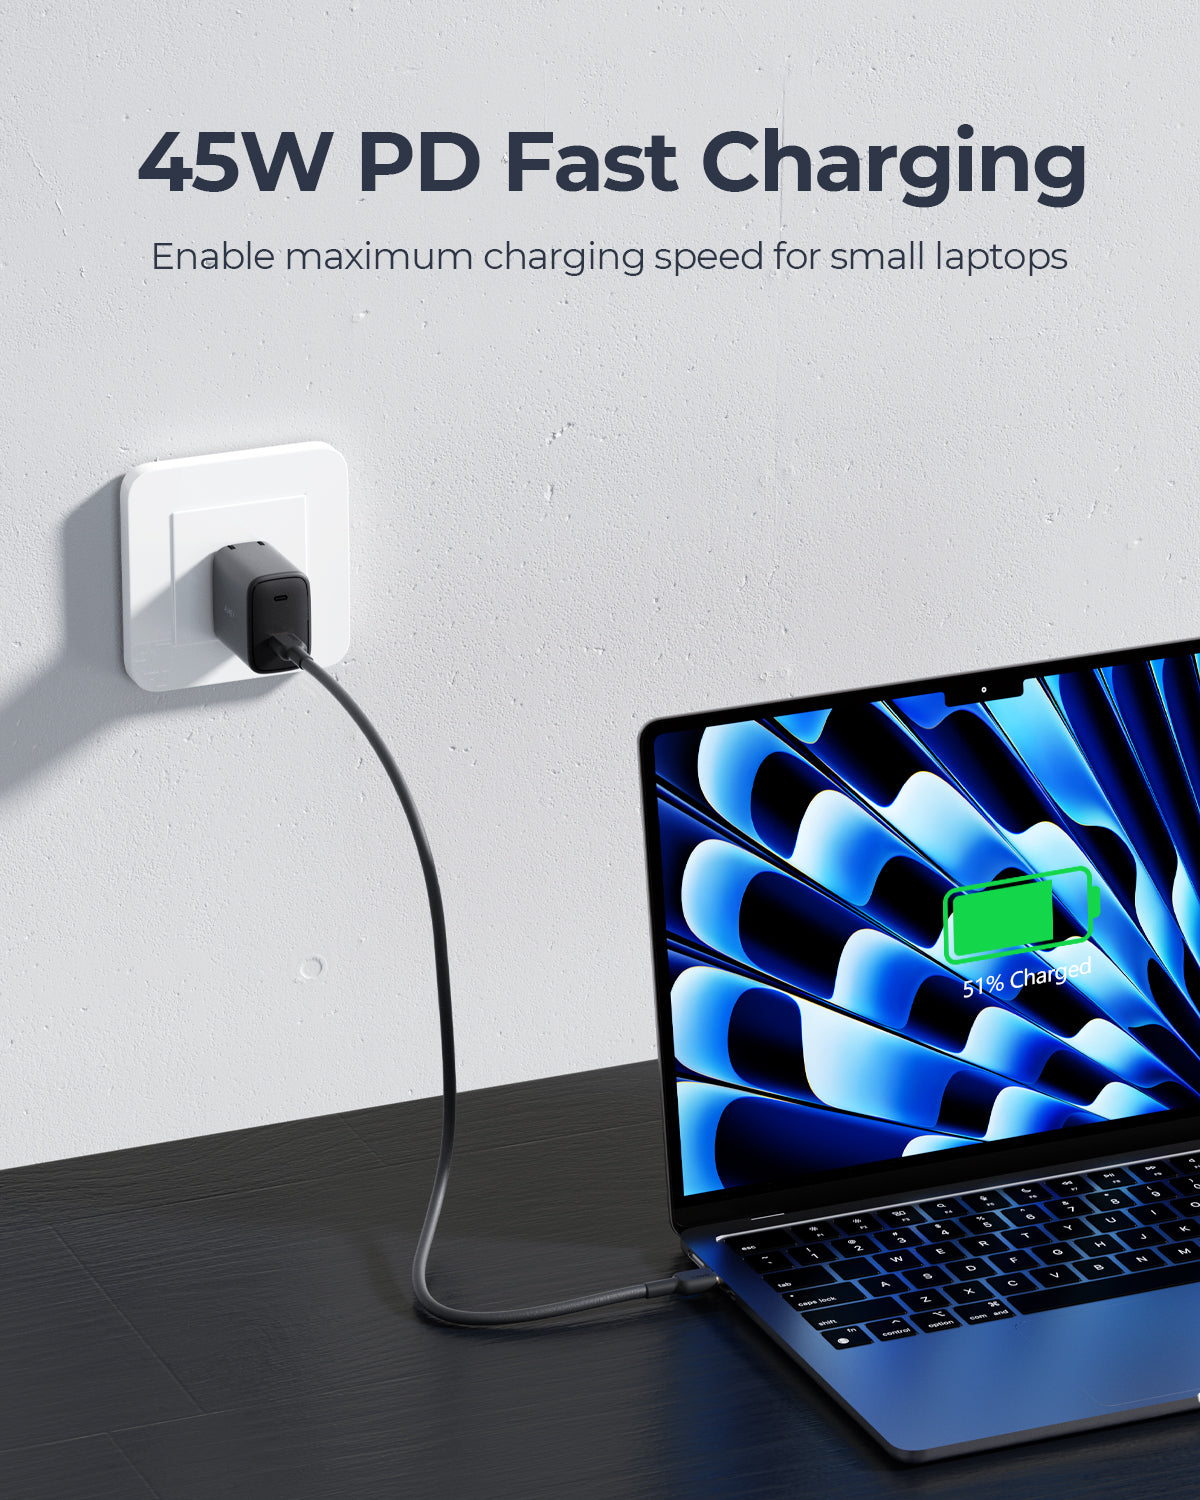 AUKEY PA-F4 Swift 45W PD Wall Charger with GaN Power Tech